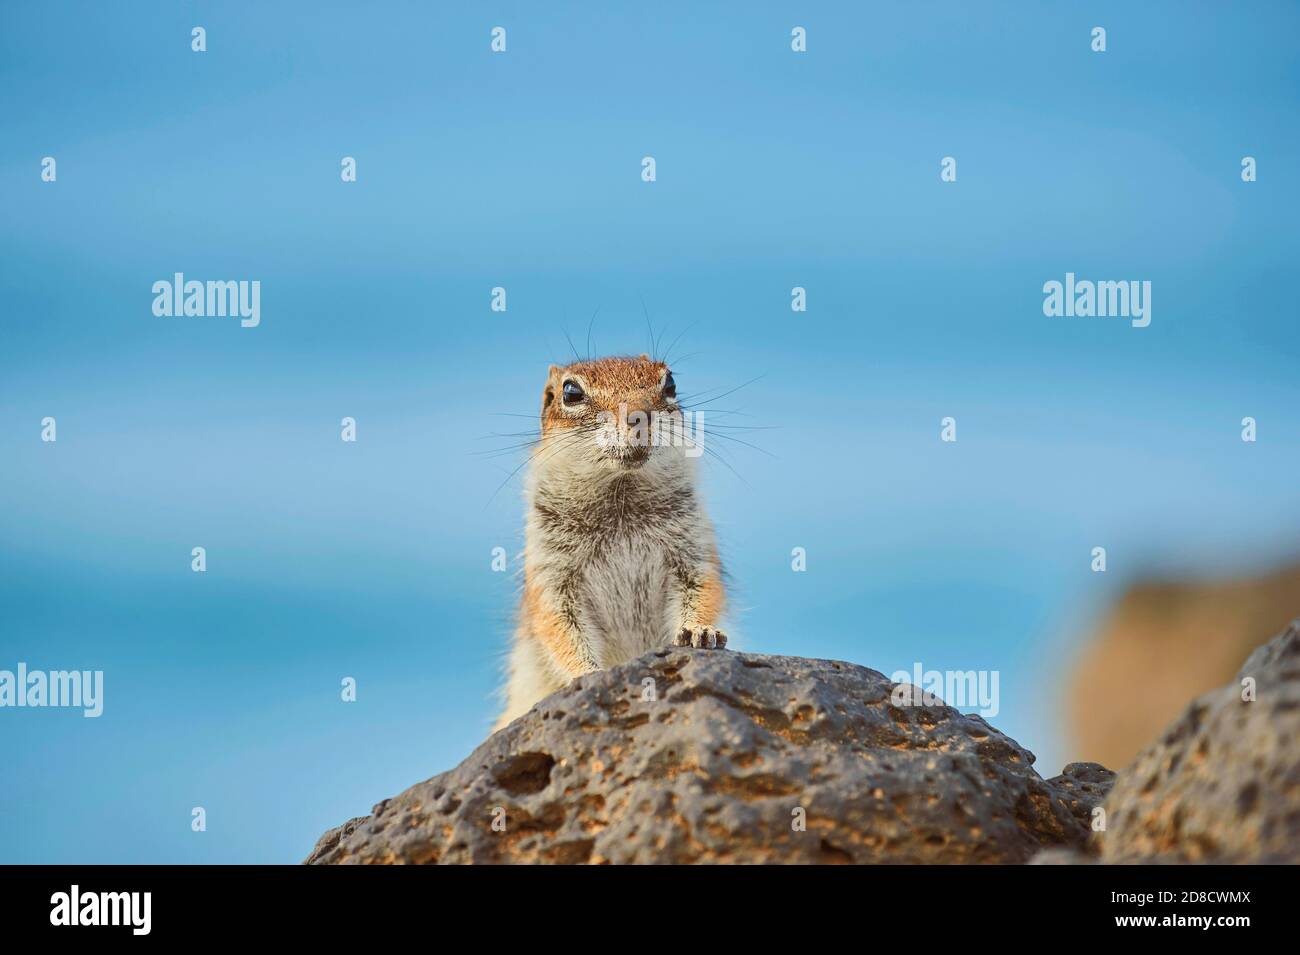 barbary ground squirrel, North African ground squirrel (Atlantoxerus getulus), sitting on a volcanic rock, front view, Canary Islands, Fuerteventura Stock Photo